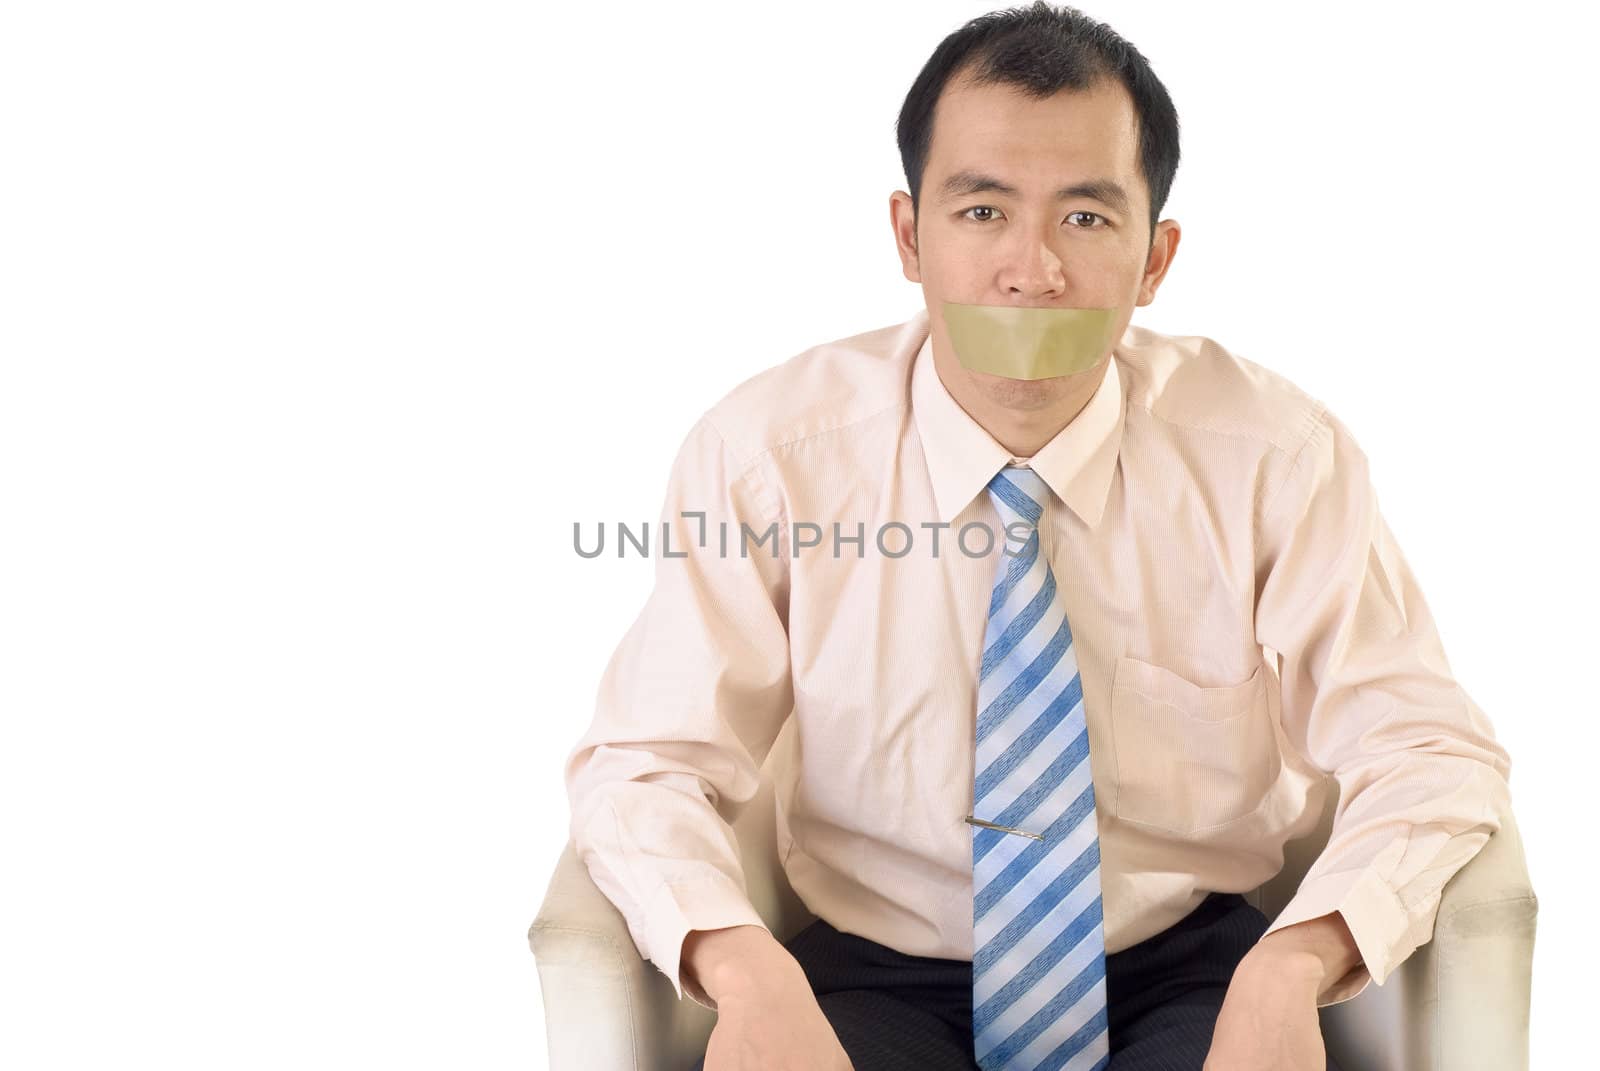 Silent businessman with tape on mouth sit on white background.